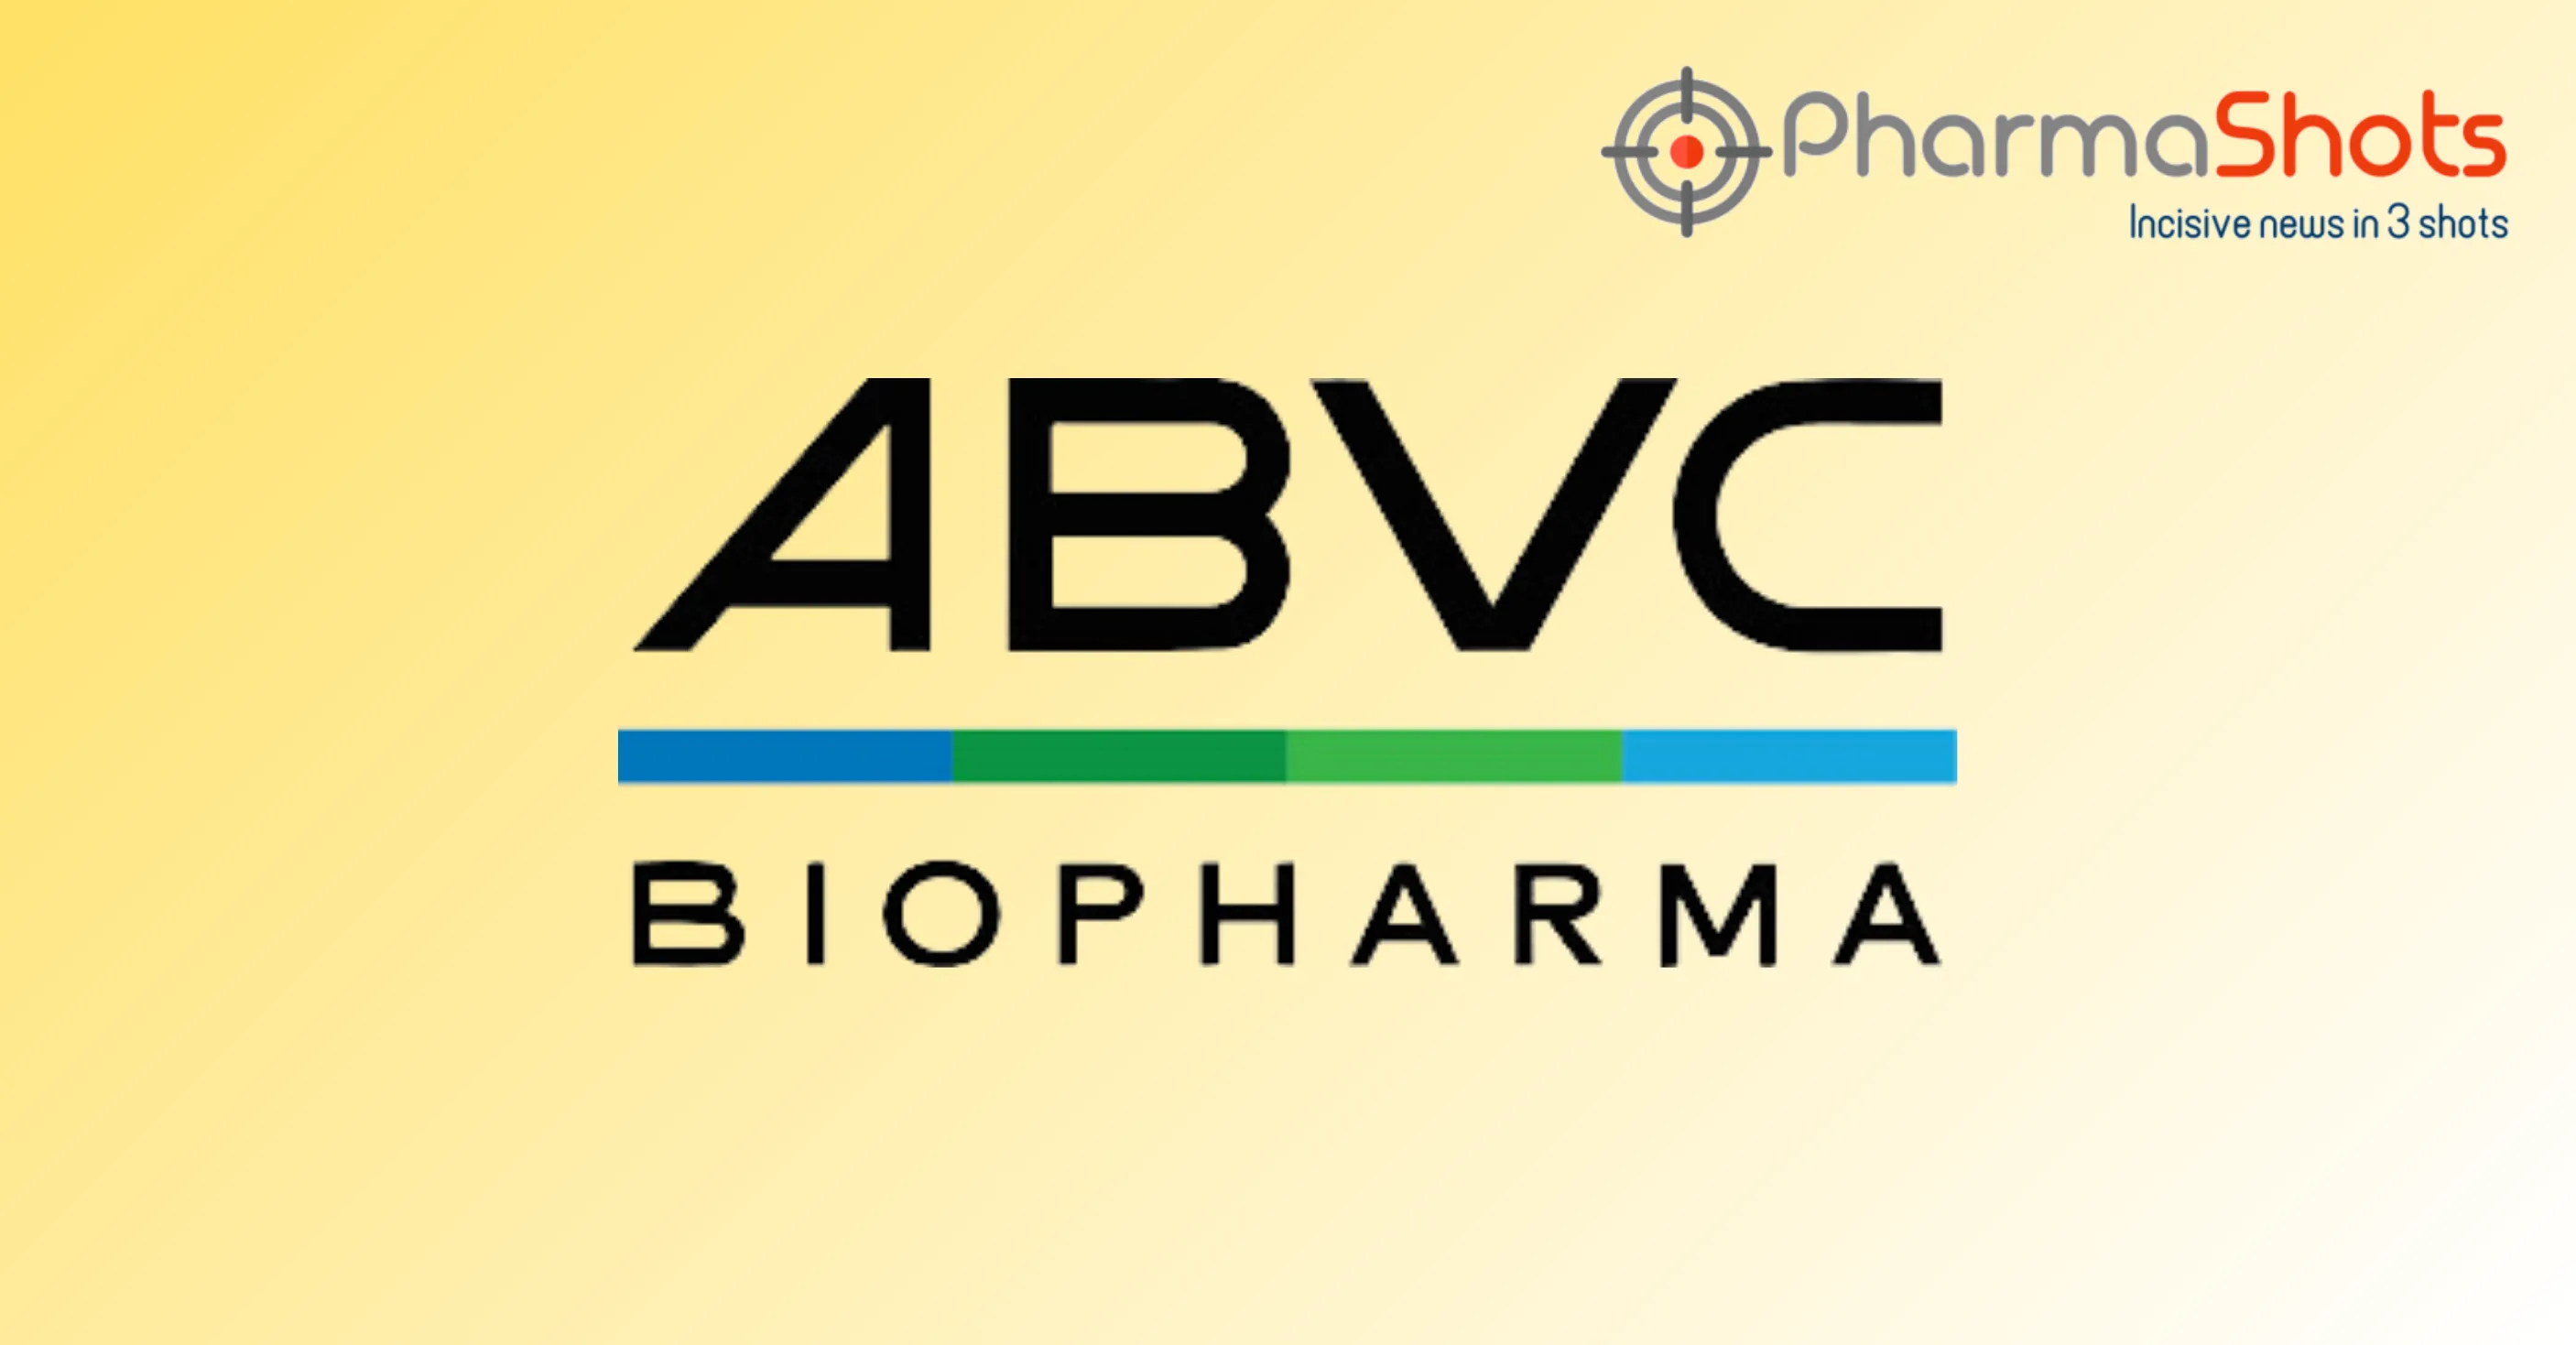 ABVC BioPharma Enters into a Global Licensing Agreement with ForSeeCon Eye Corporation (FEYE) for the Development and Commercialization of Various Ophthalmology Products